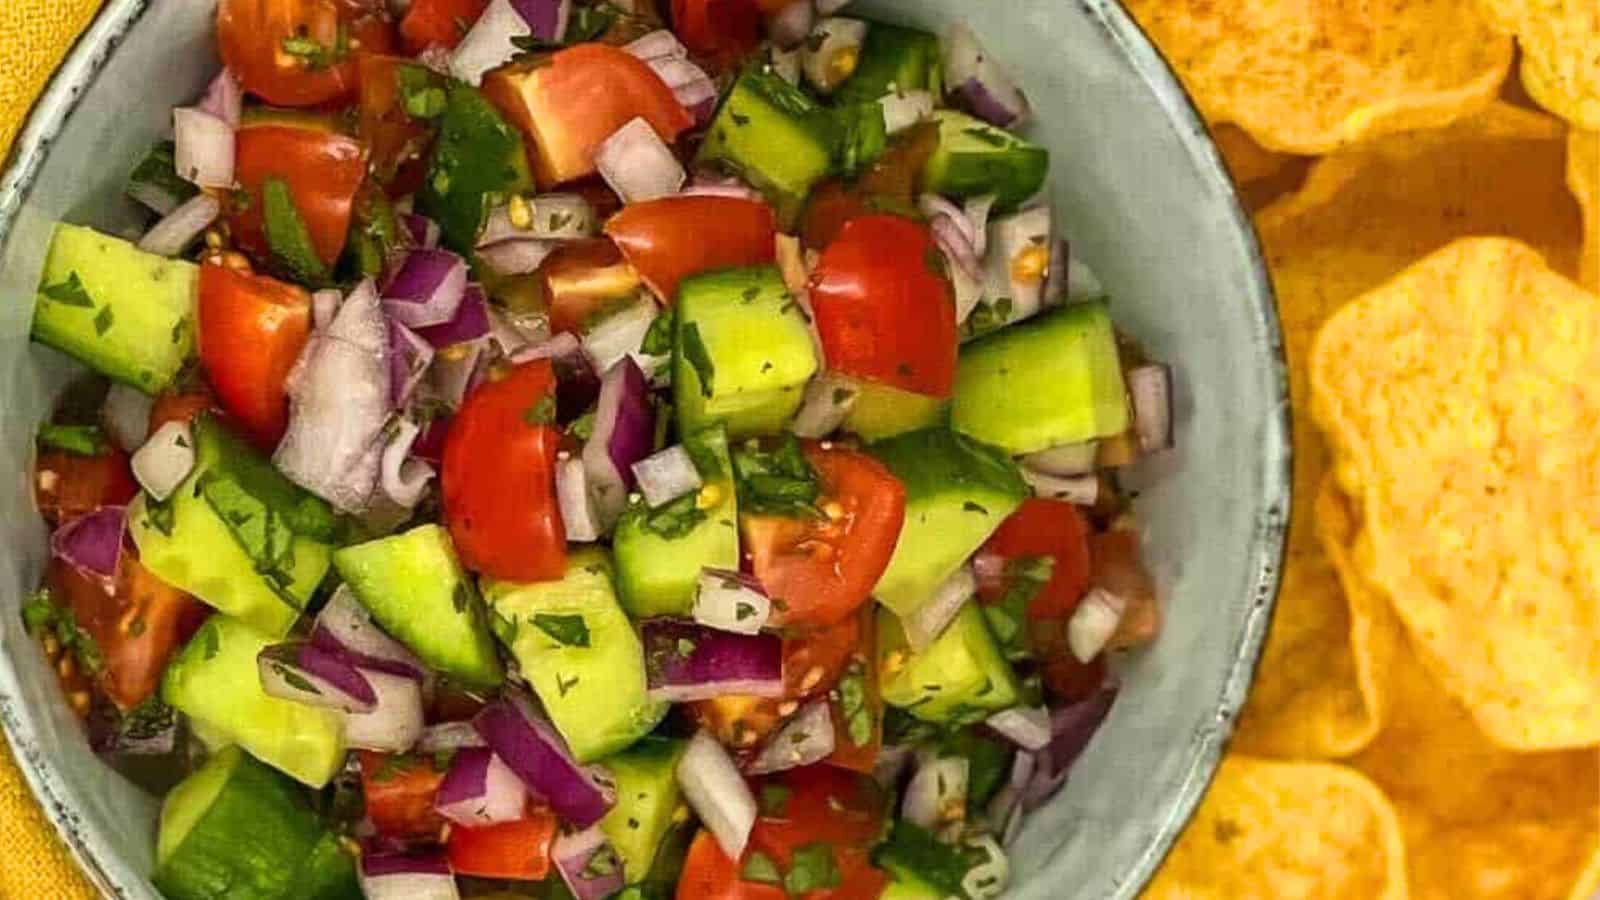 Chunks of tomato, cucumber, and onion in a bowl.